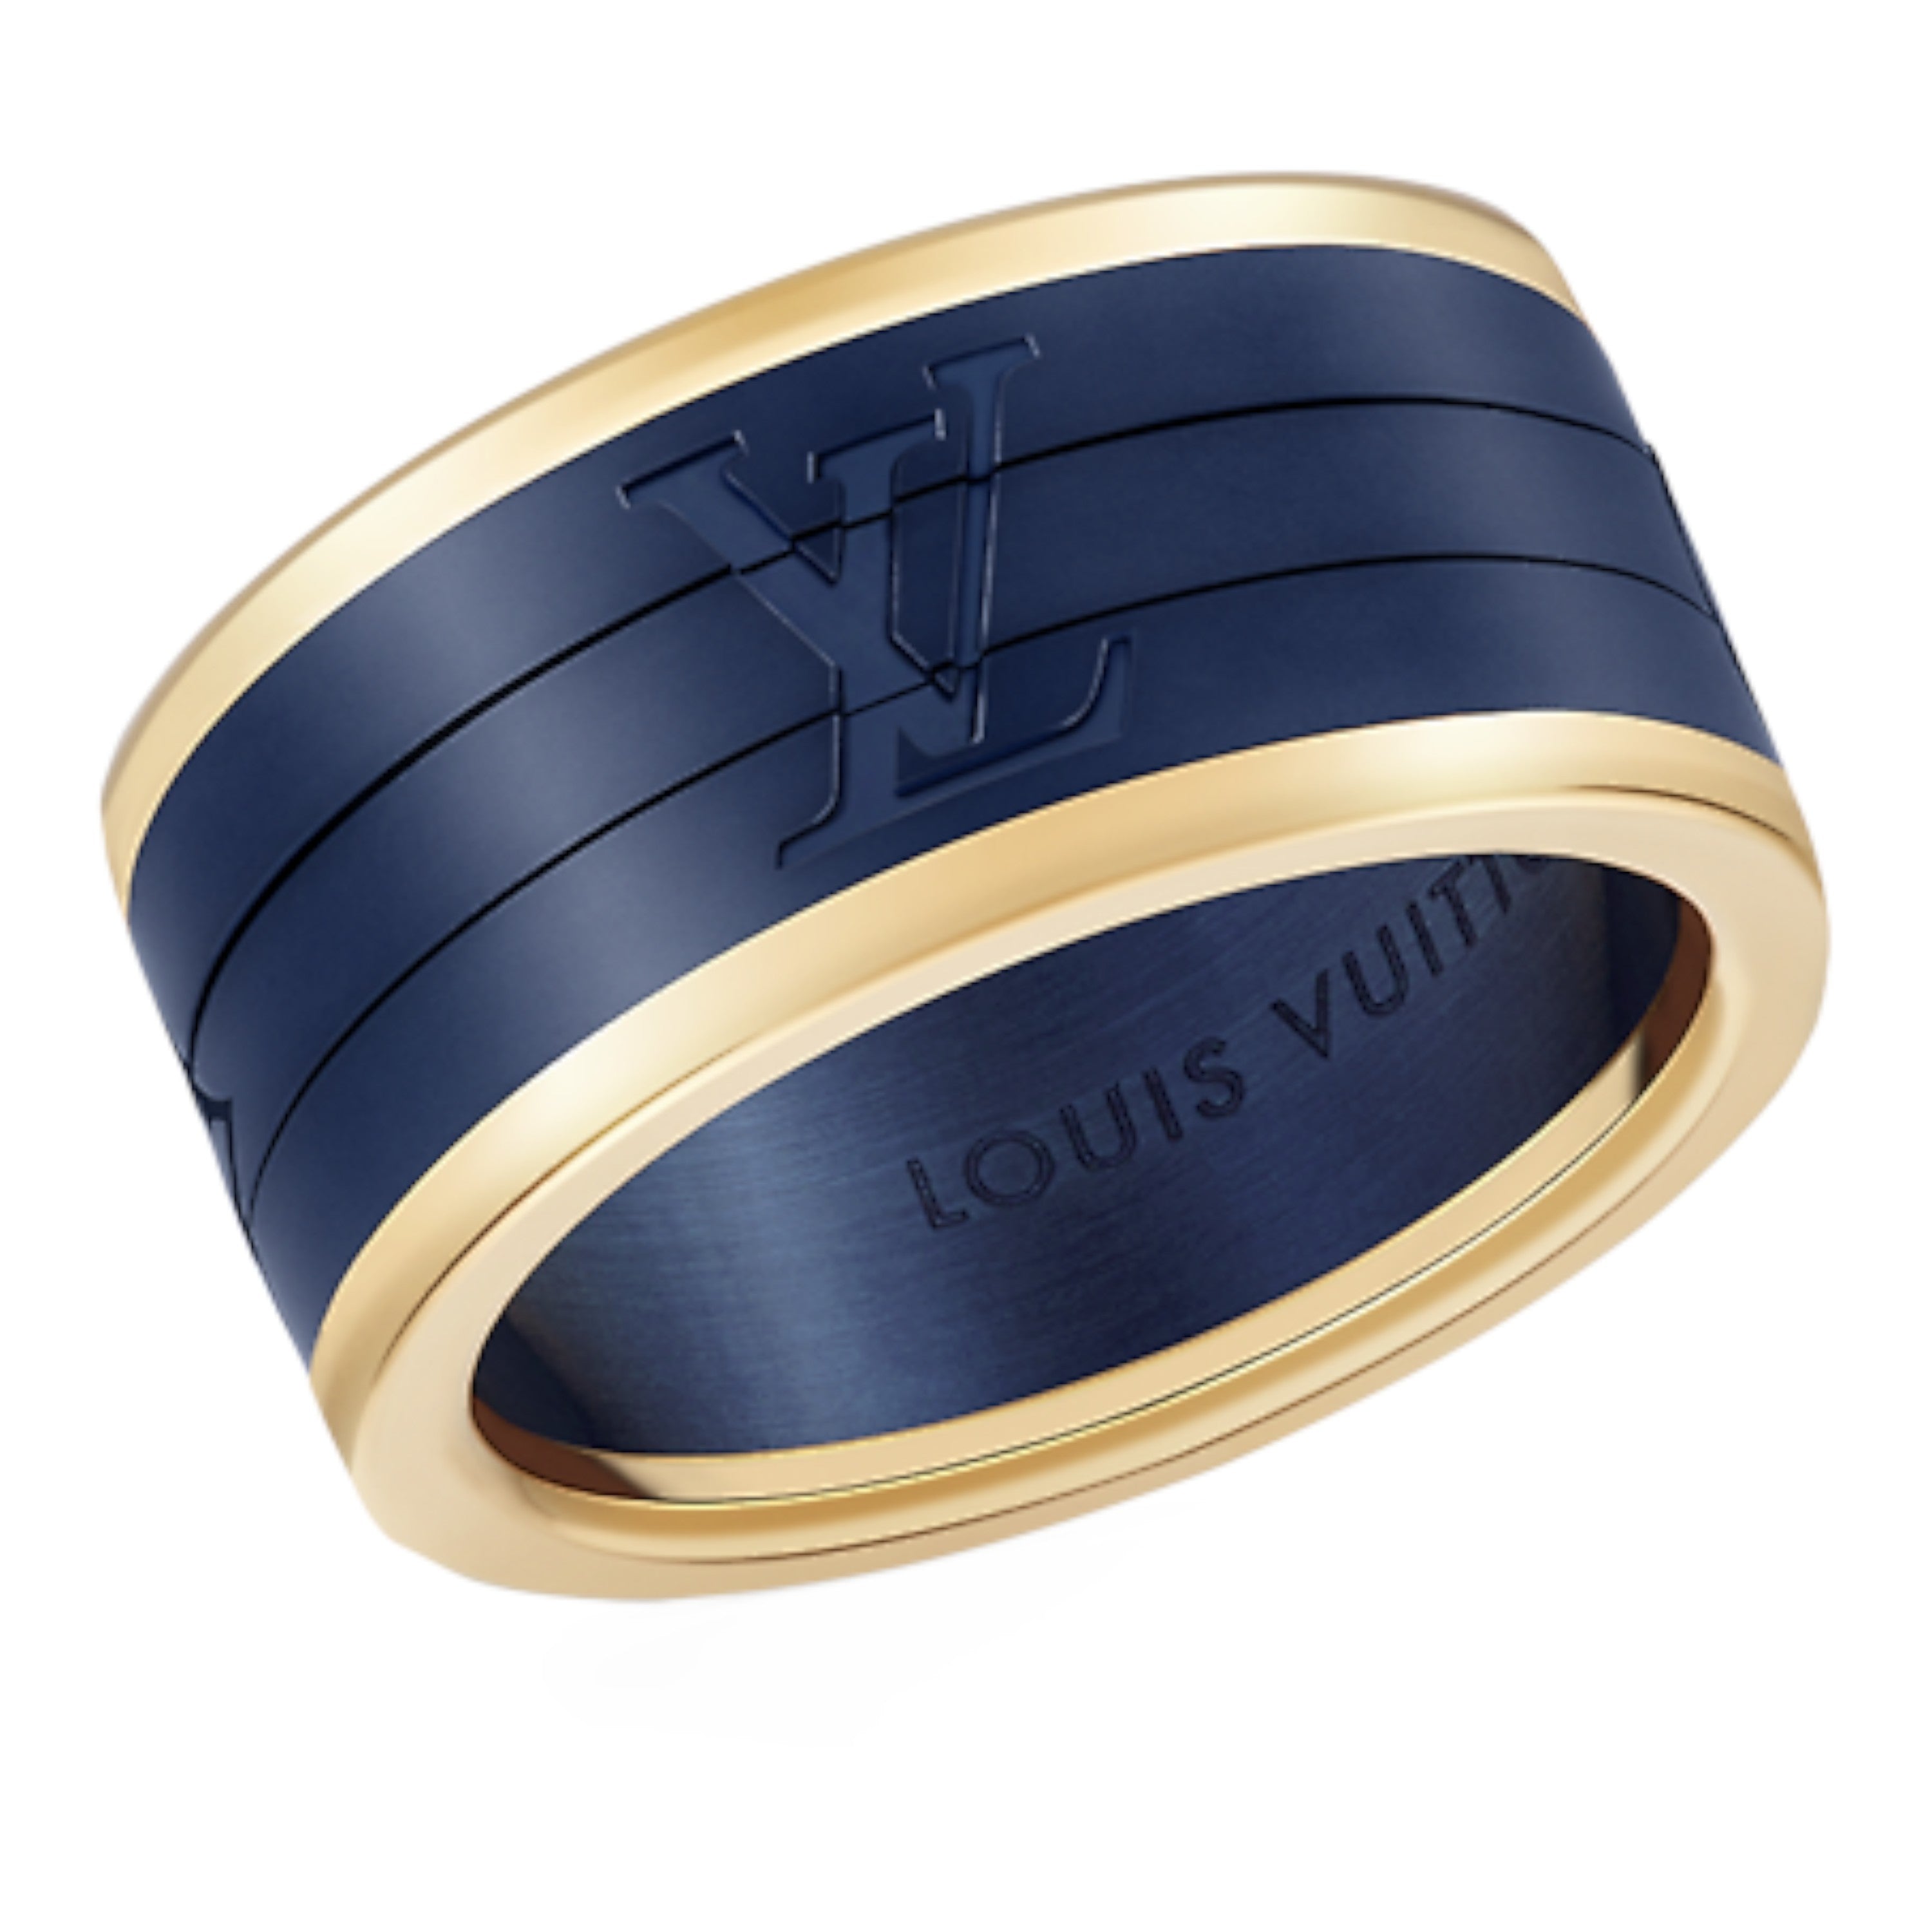 Les Gastons Vuitton Puzzle Ring, Yellow Gold and Titanium